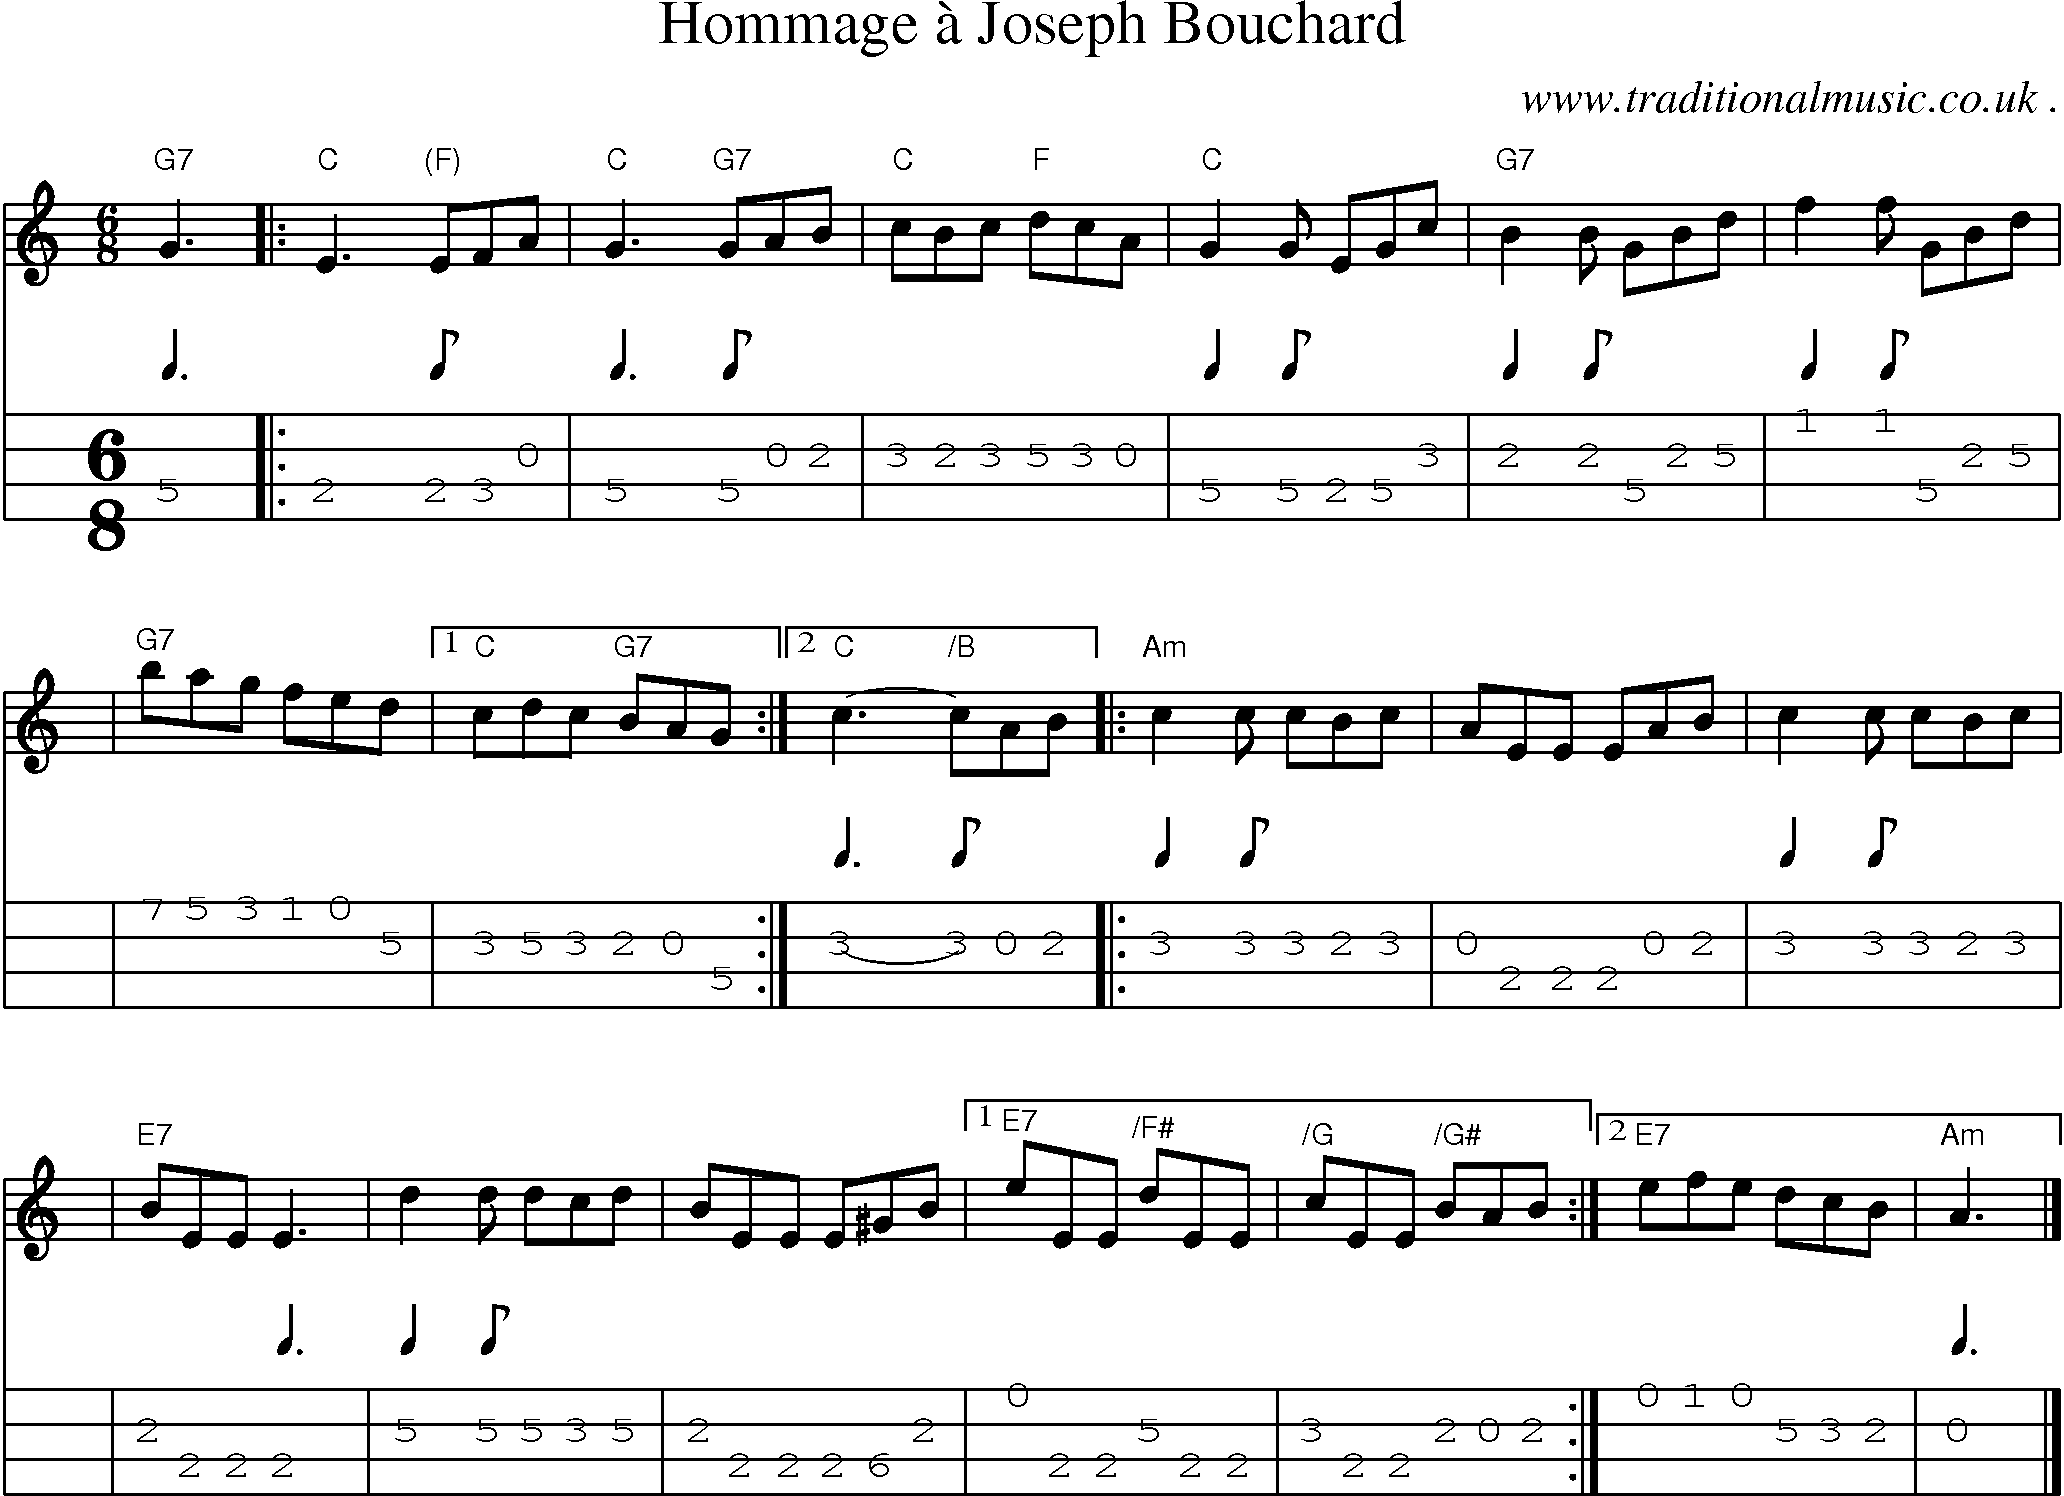 Sheet-music  score, Chords and Mandolin Tabs for Hommage A Joseph Bouchard